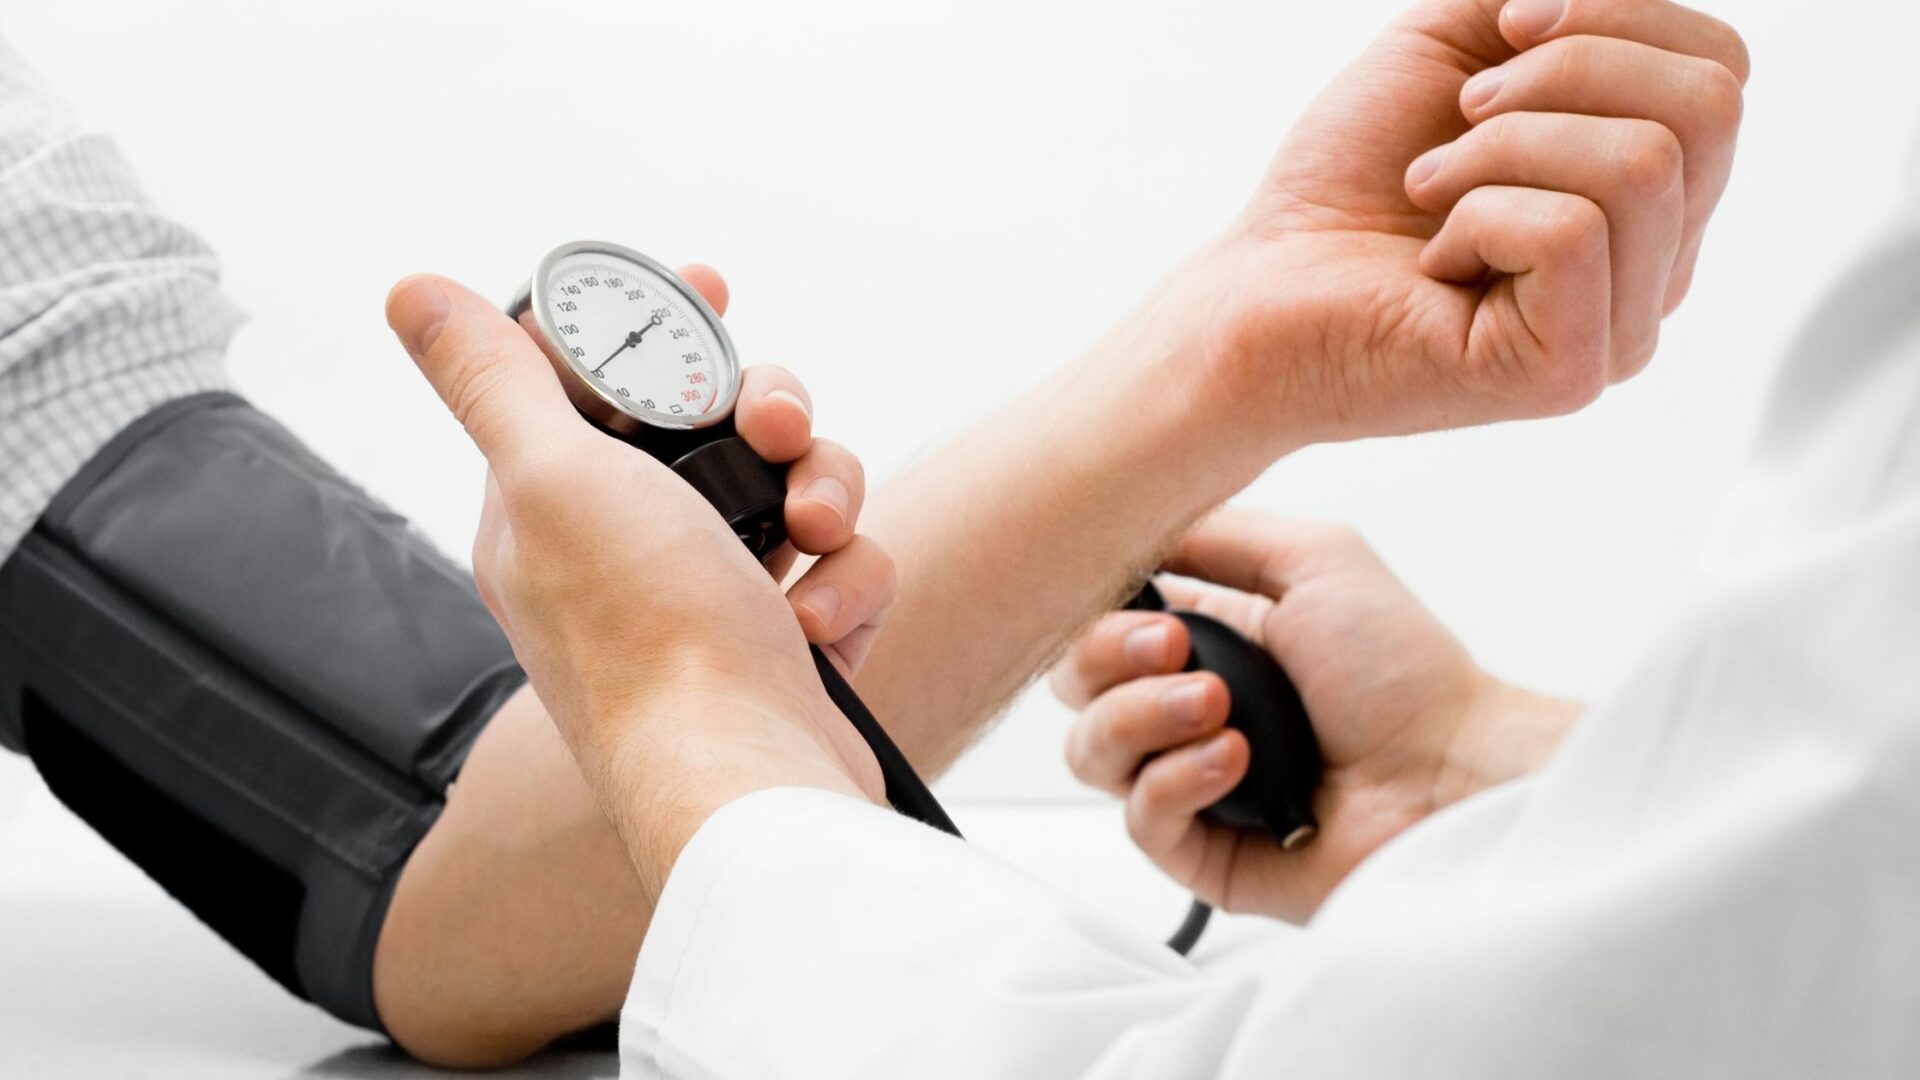 Hypertension: How Does Diet Influence Your Blood pressure?